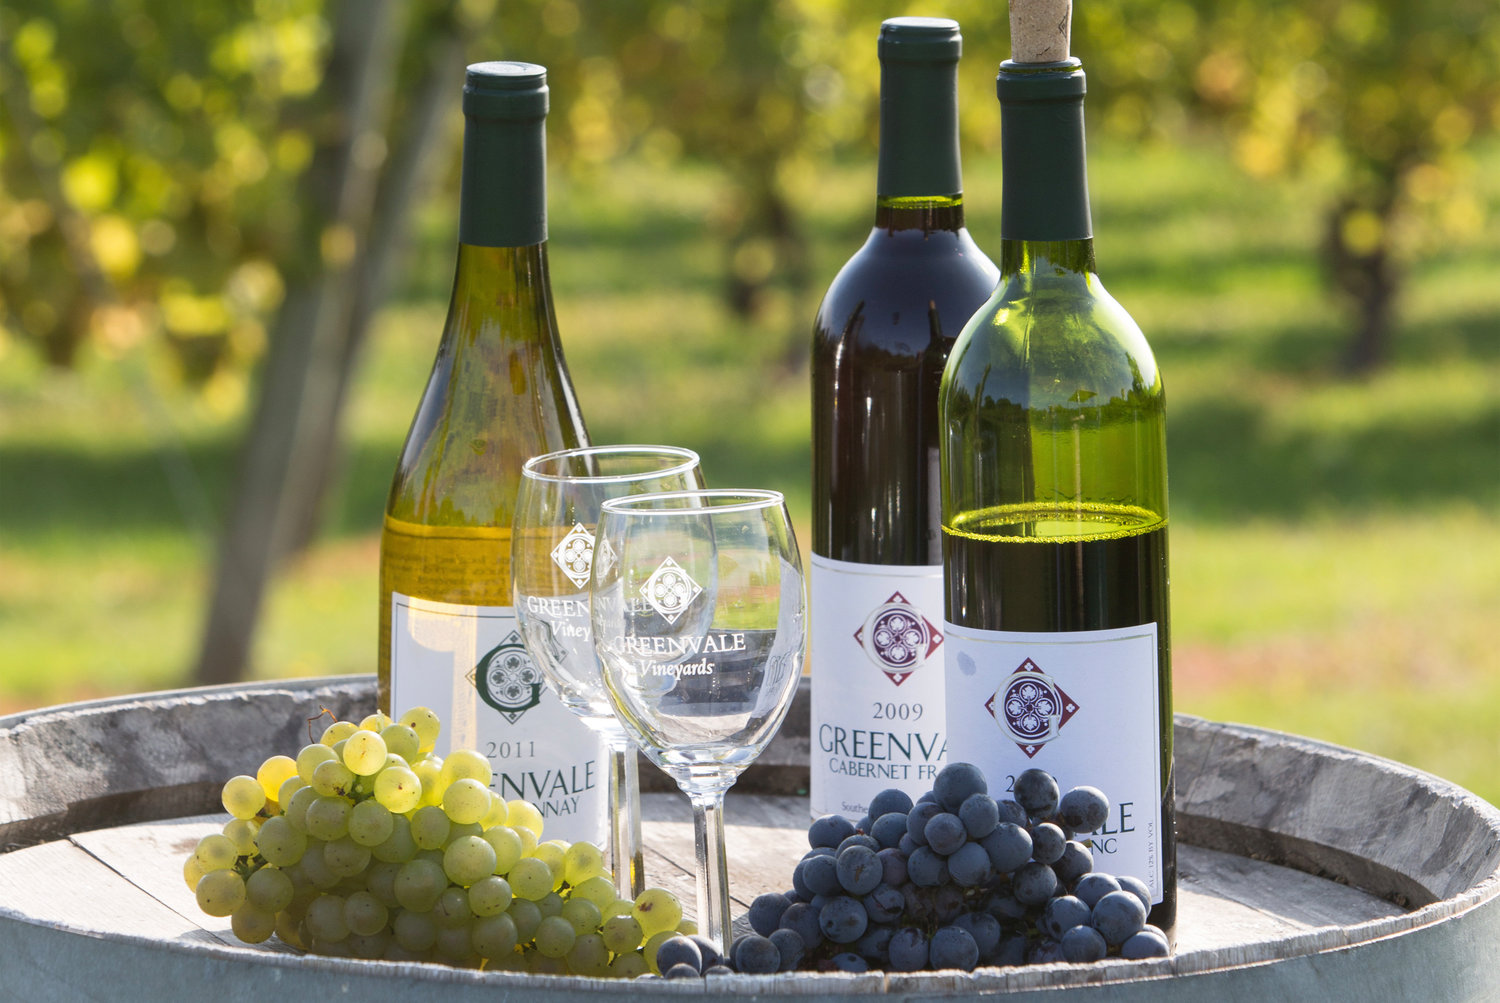 Fall offerings can be sampled by the glass 
in an expanded outdoor wine garden